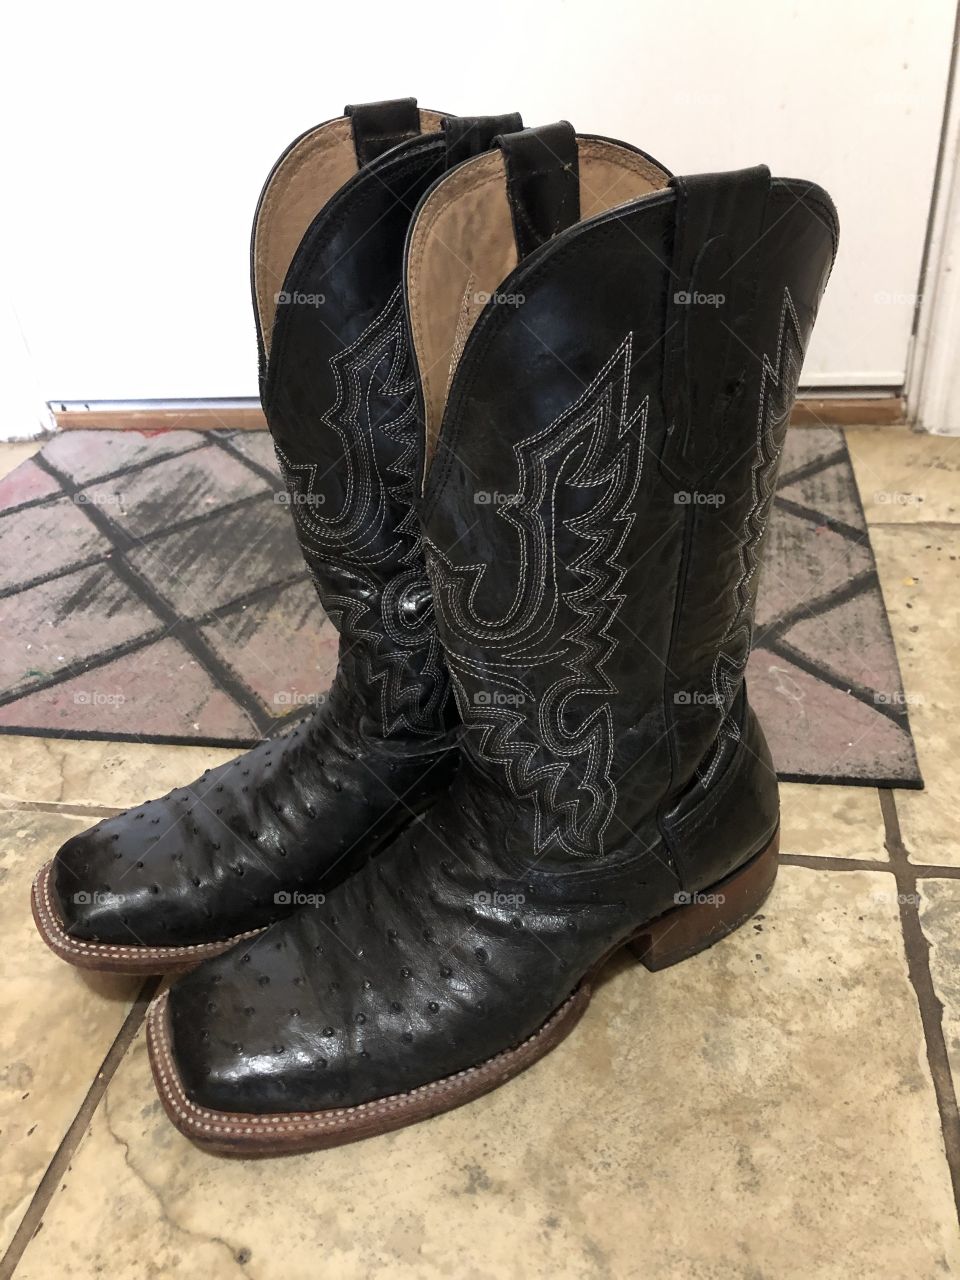 My fanciest boots yet, black full quill ostrich. They feel like slippers.